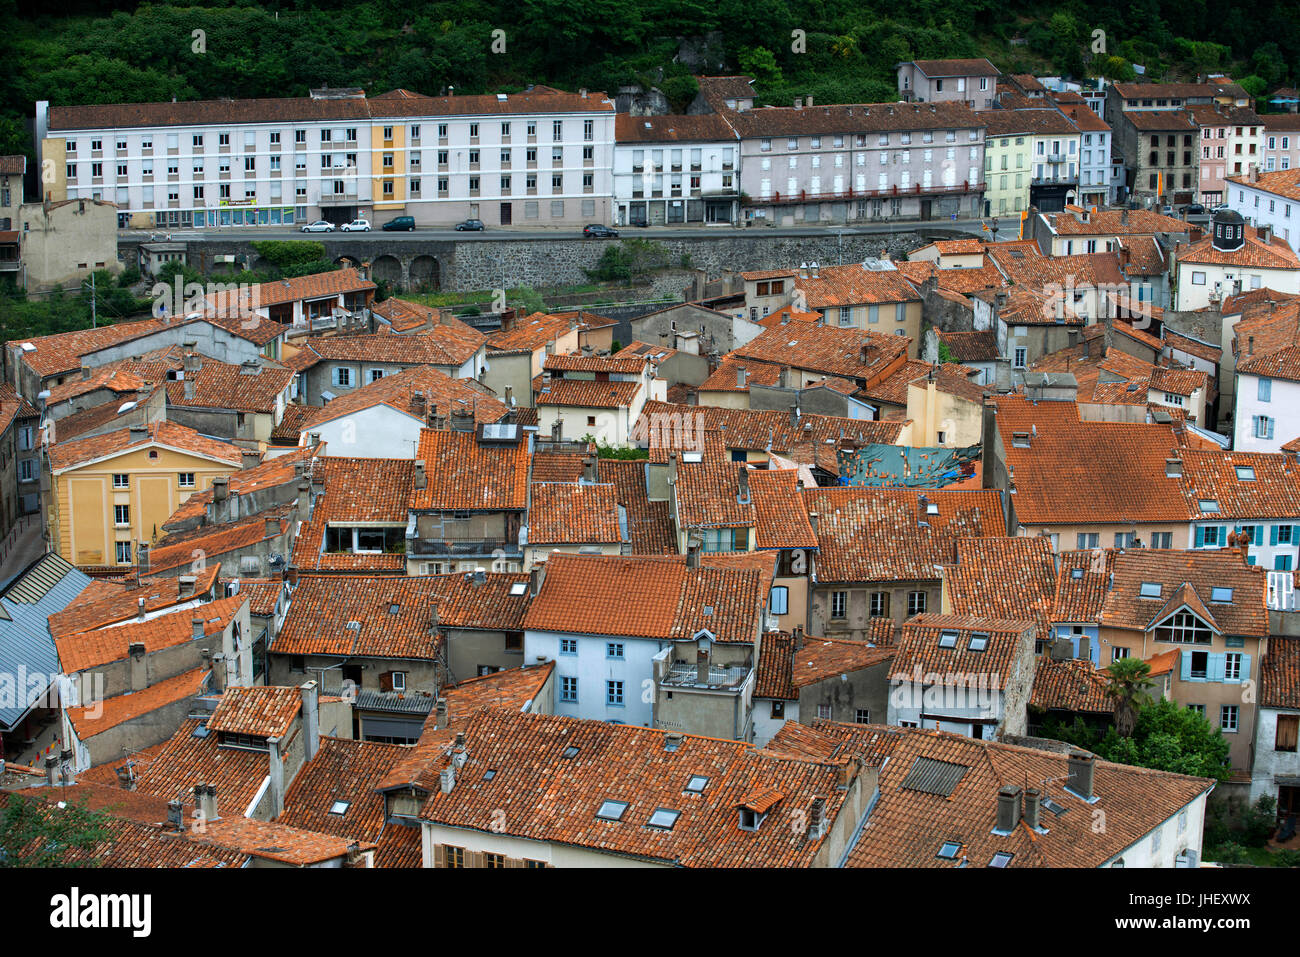 View of Foix, Midi-Pyrénées, Pyrenees, departement of Ariege, France, Europe. Houses with red tile roofs. Stock Photo